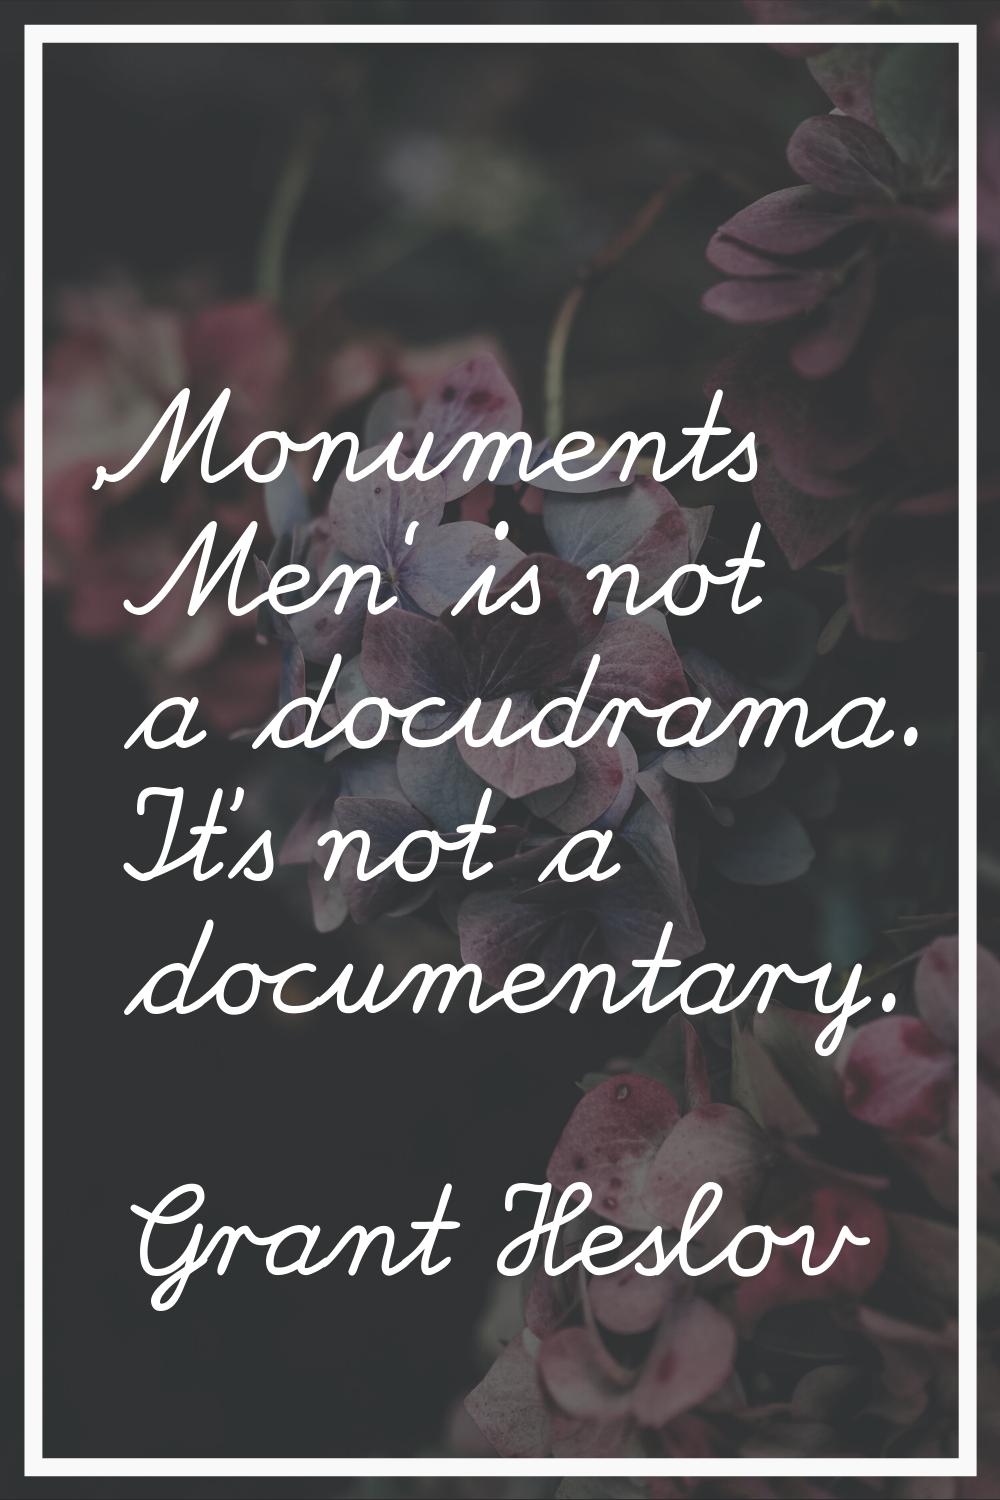 'Monuments Men' is not a docudrama. It's not a documentary.